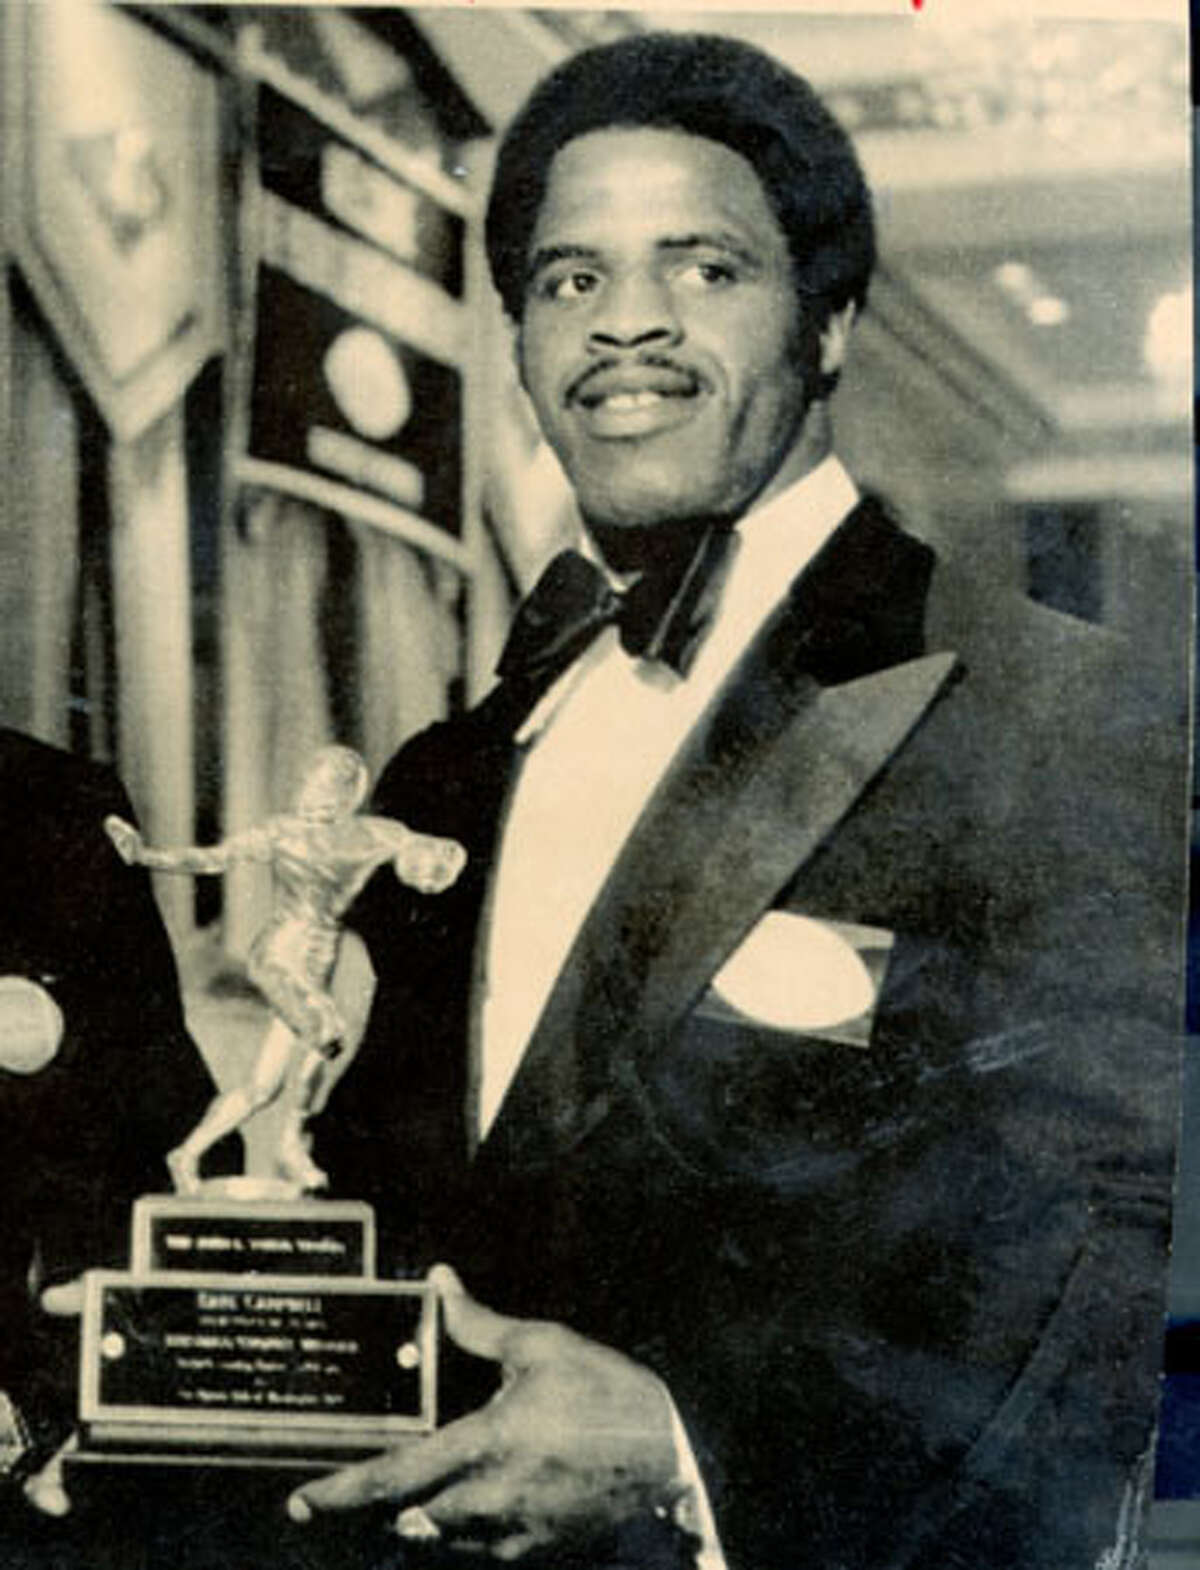 Earl Campbell won the 1977 Heisman Trophy after rushing for 1,744 yards and 18 TDs as Texas won the Southwest Conference with an 11-0 record. Campbell rushed for 222 yards in the regular-season finale against Texas A&M and was the No. 1 overall pick in the 1978 NFL Draft by the Houston Oilers. The Texas great rushed for 116 yards in the 1978 Cotton Bowl, but his top-ranked Longhorns lost to eventual national-champion Notre Dame 38-10. Source: attcottonbowl.com